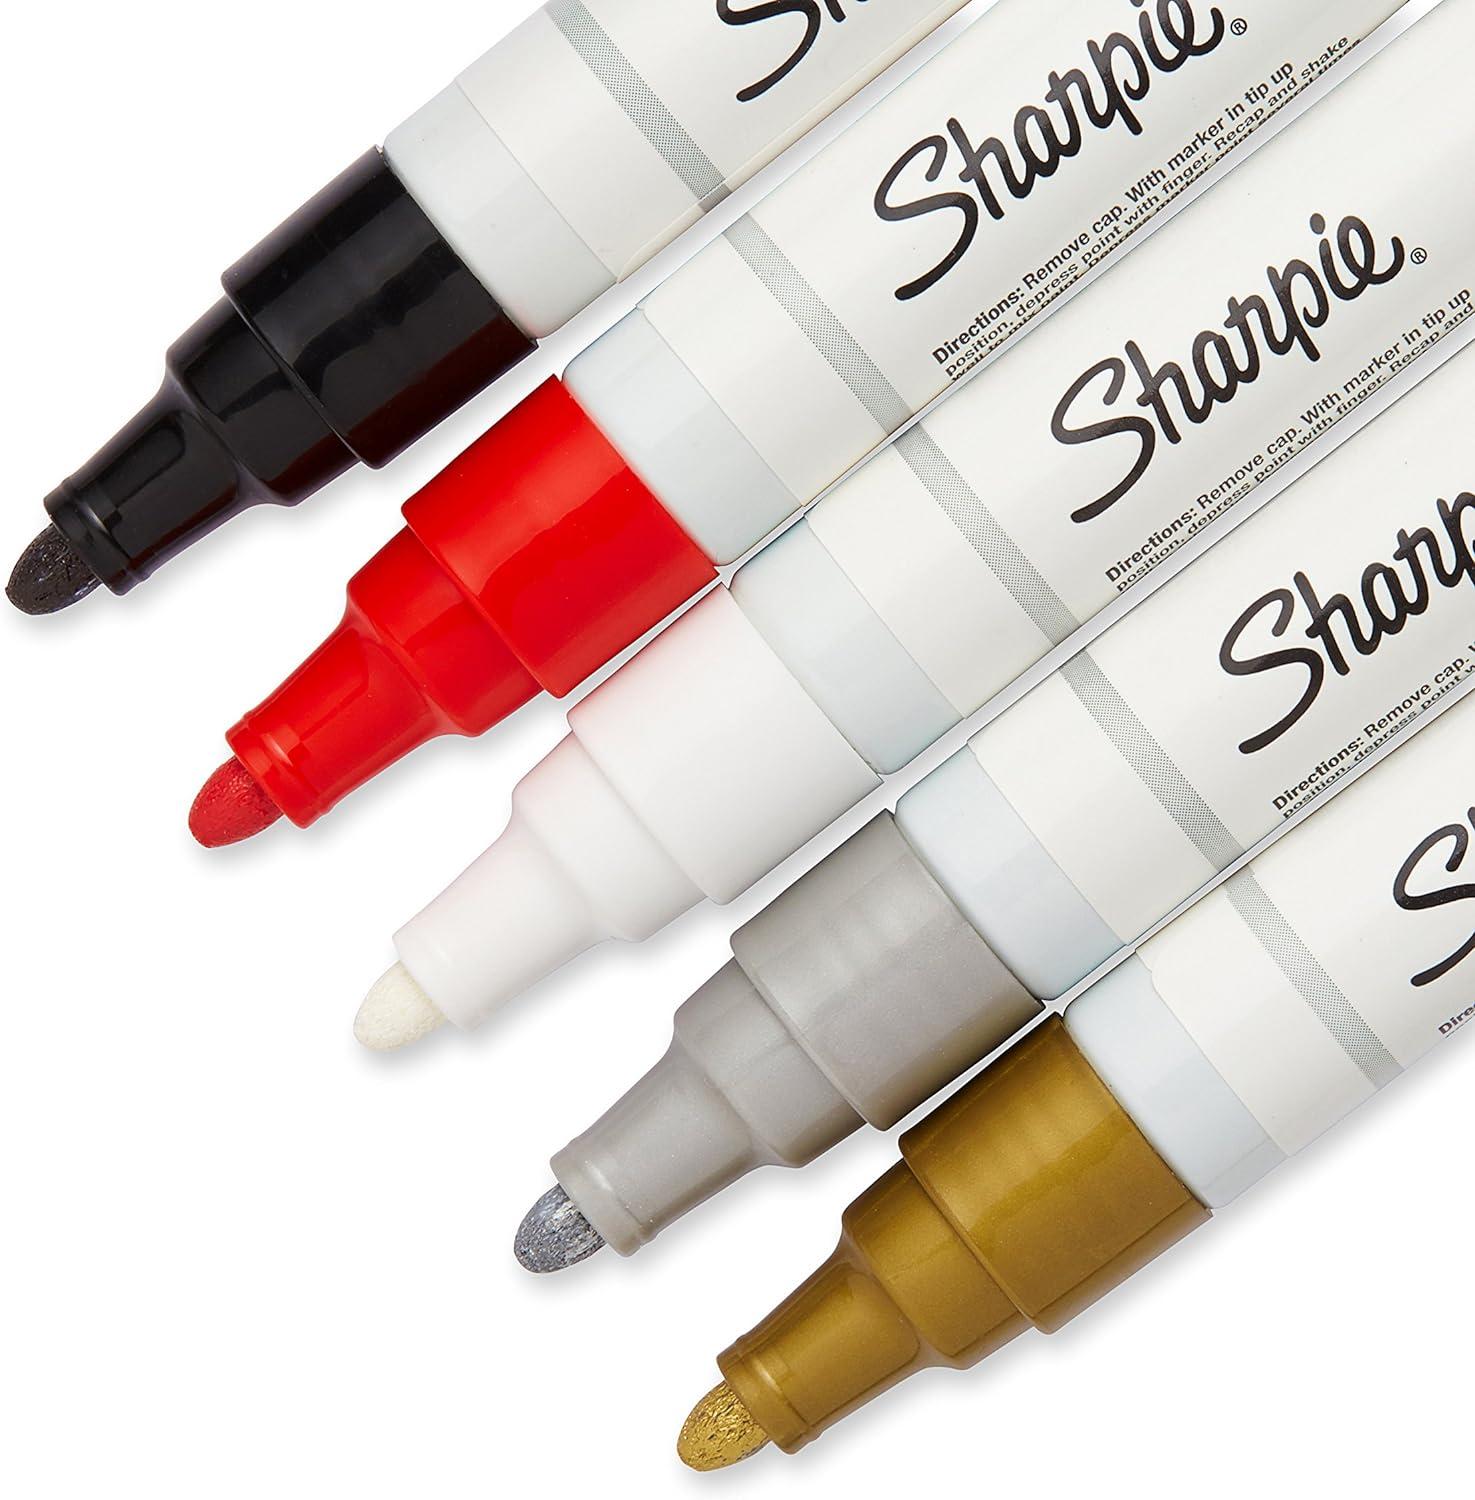  Sharpie Oil-Based Paint Markers Fine Point Assorted Colors 8  Pack : Arts, Crafts & Sewing